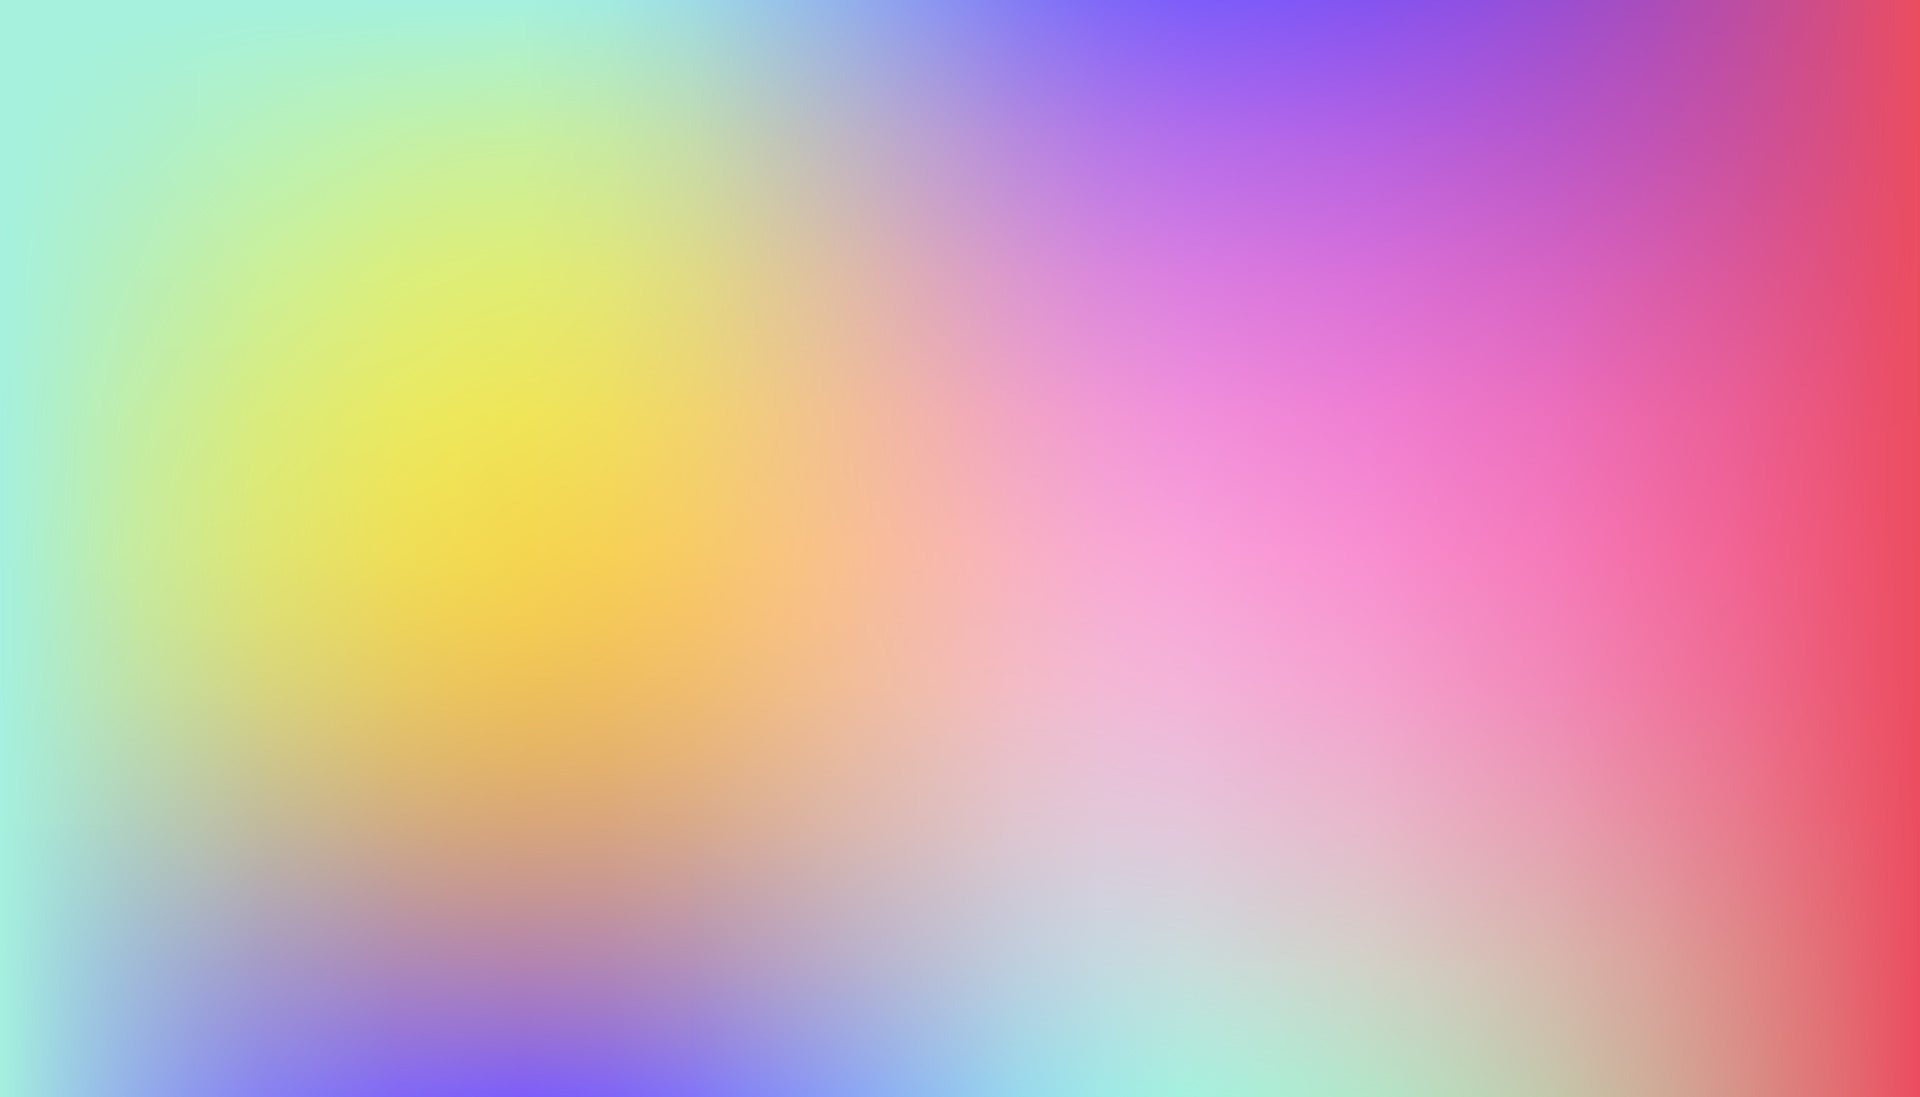 holographic-background-iridescent-foil-glitch-hologram-pastel-neon-rainbow-ultraviolet-metallic-paper-template-for-presentation-cover-to-web-design-abstract-colorful-gradient-free-vec.jpg